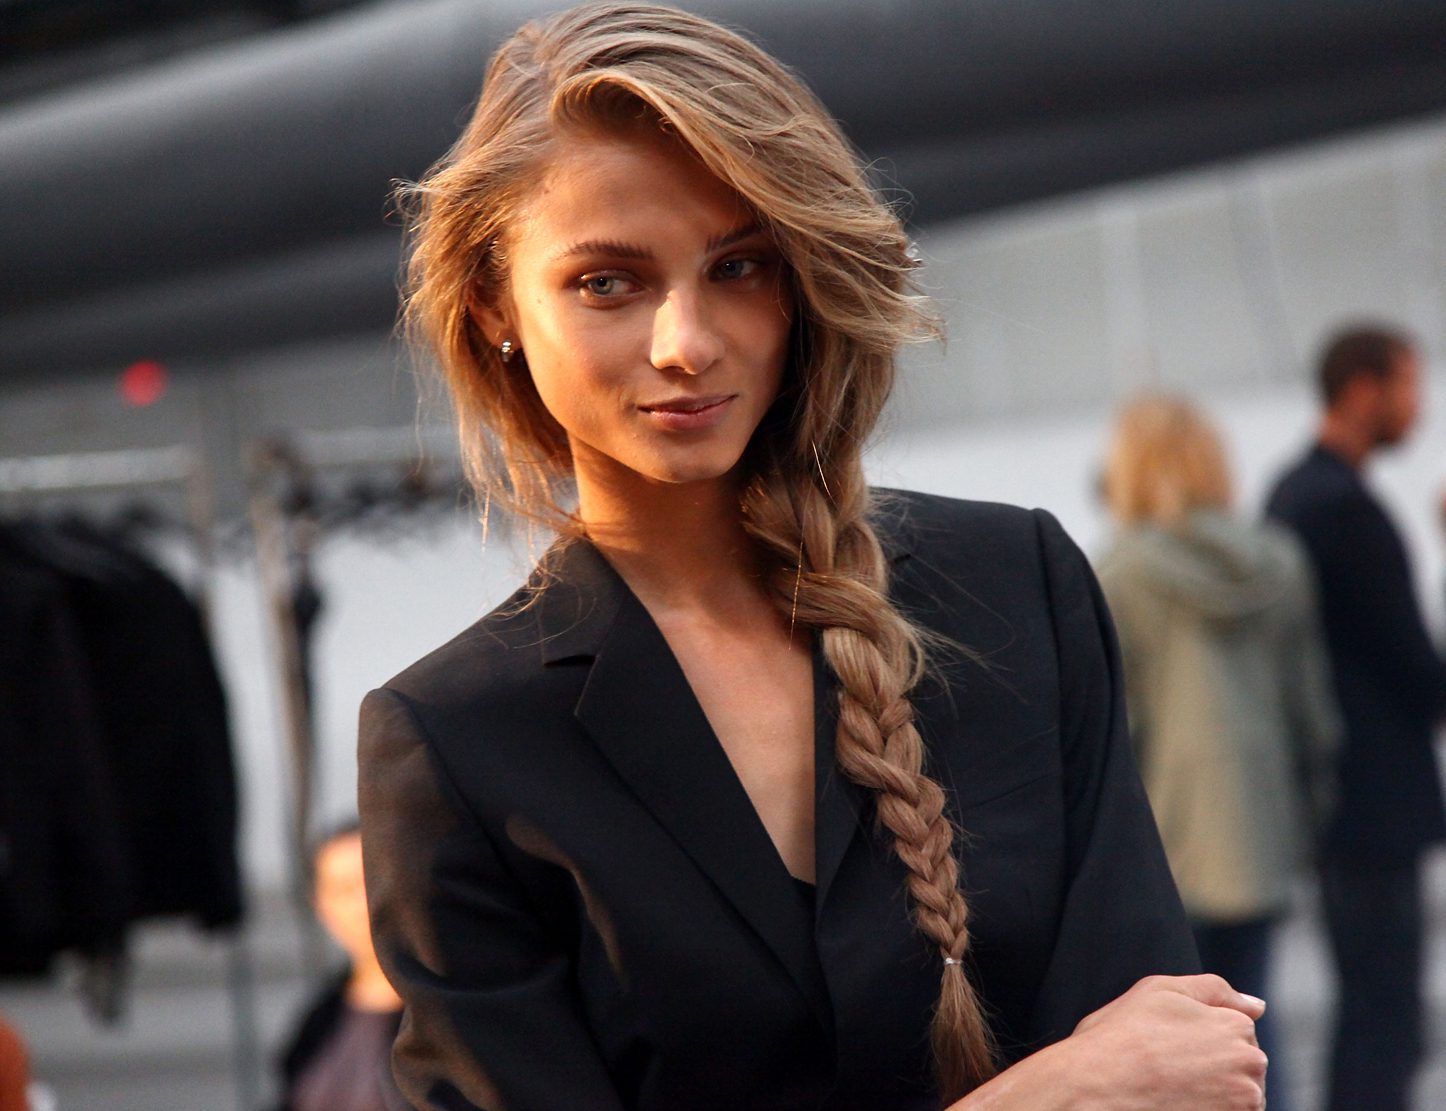 Braided Hairstyles For Girls